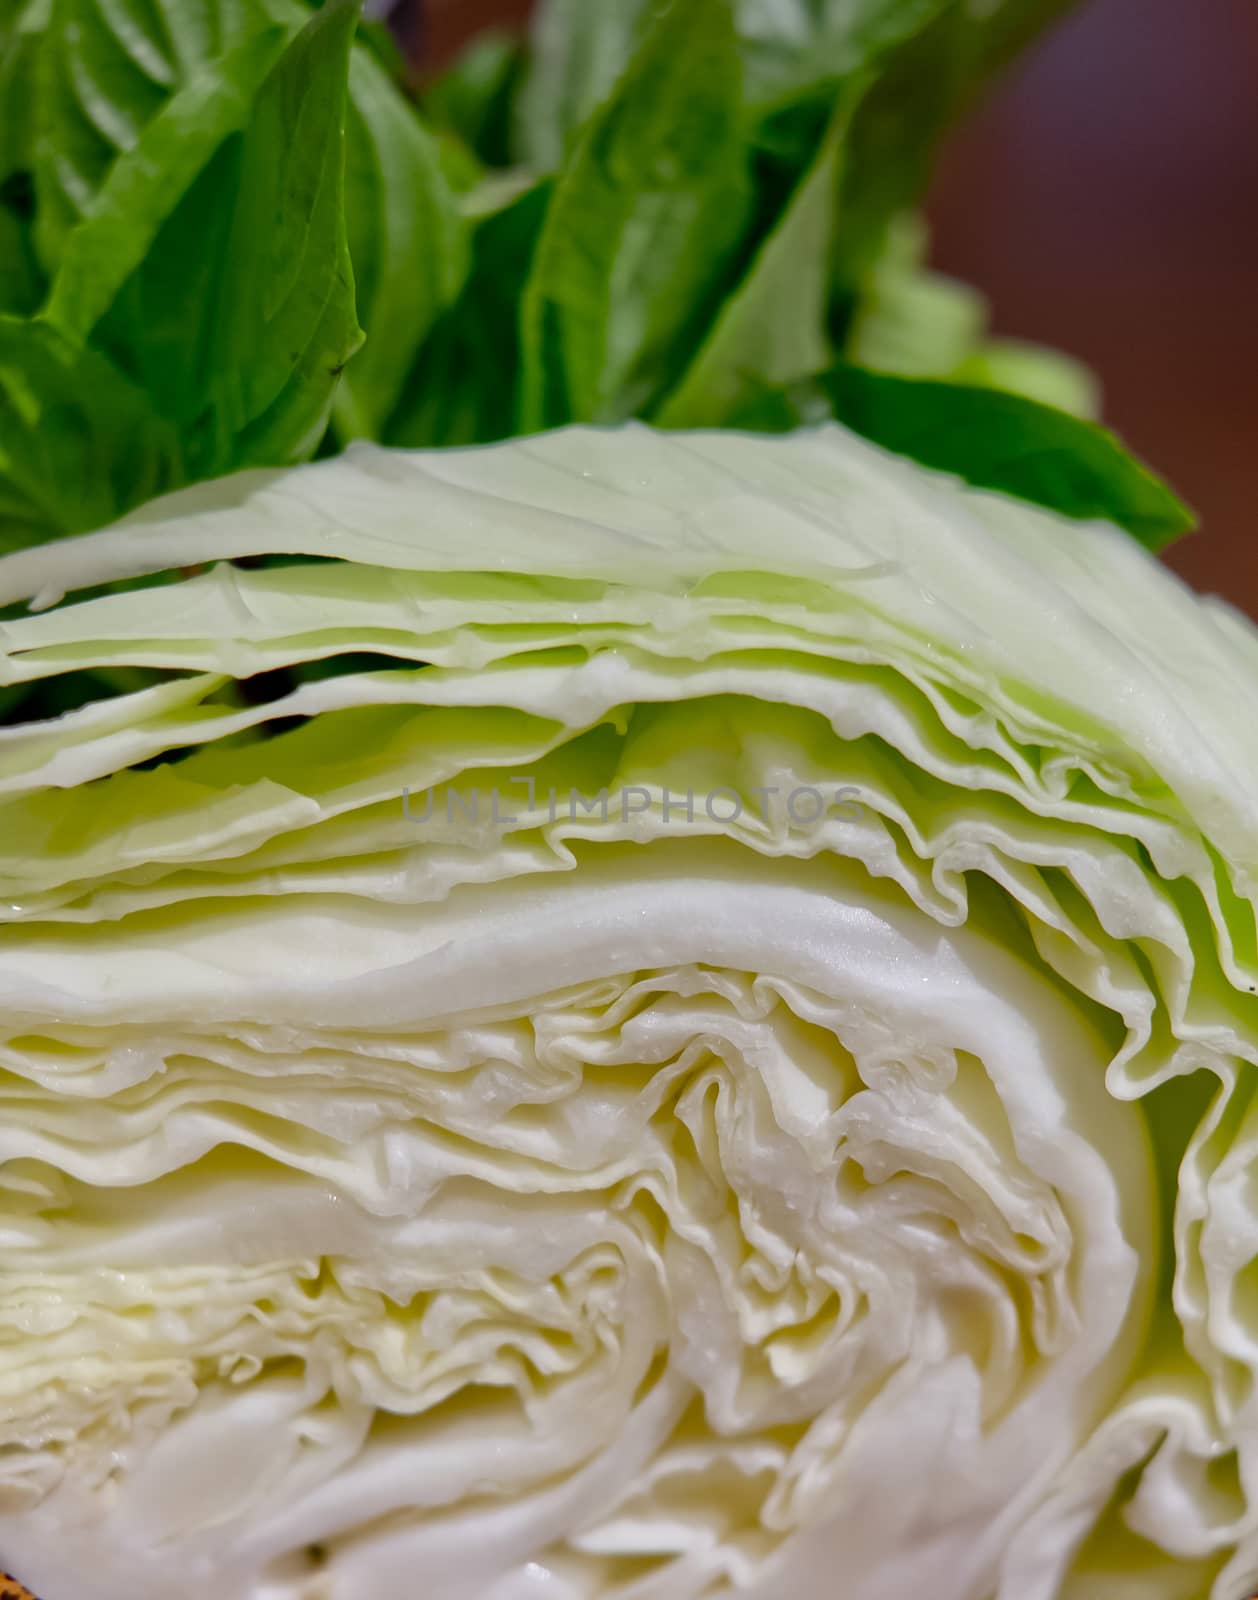 Green salad cabbage. Side dishes for Northeast food in Thailand.